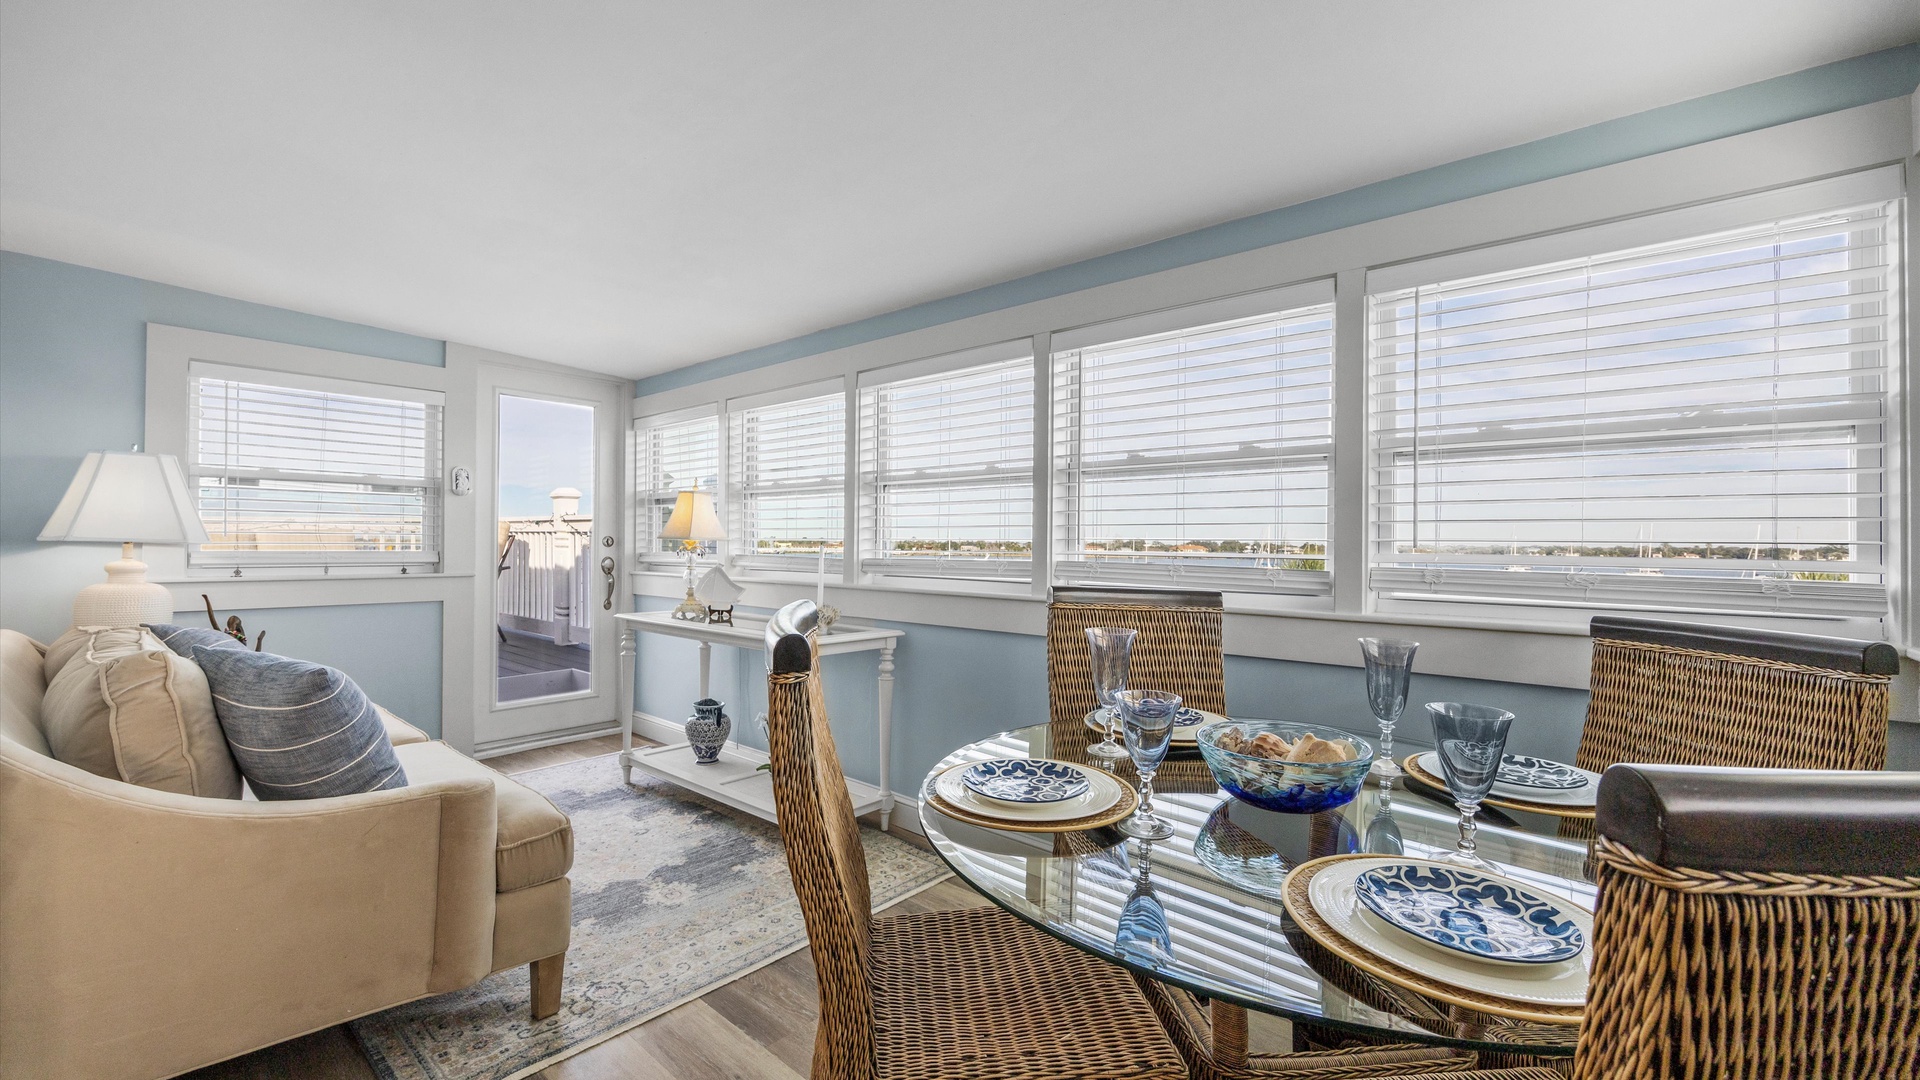 Dine in style or relax with a book in the serene back sunroom